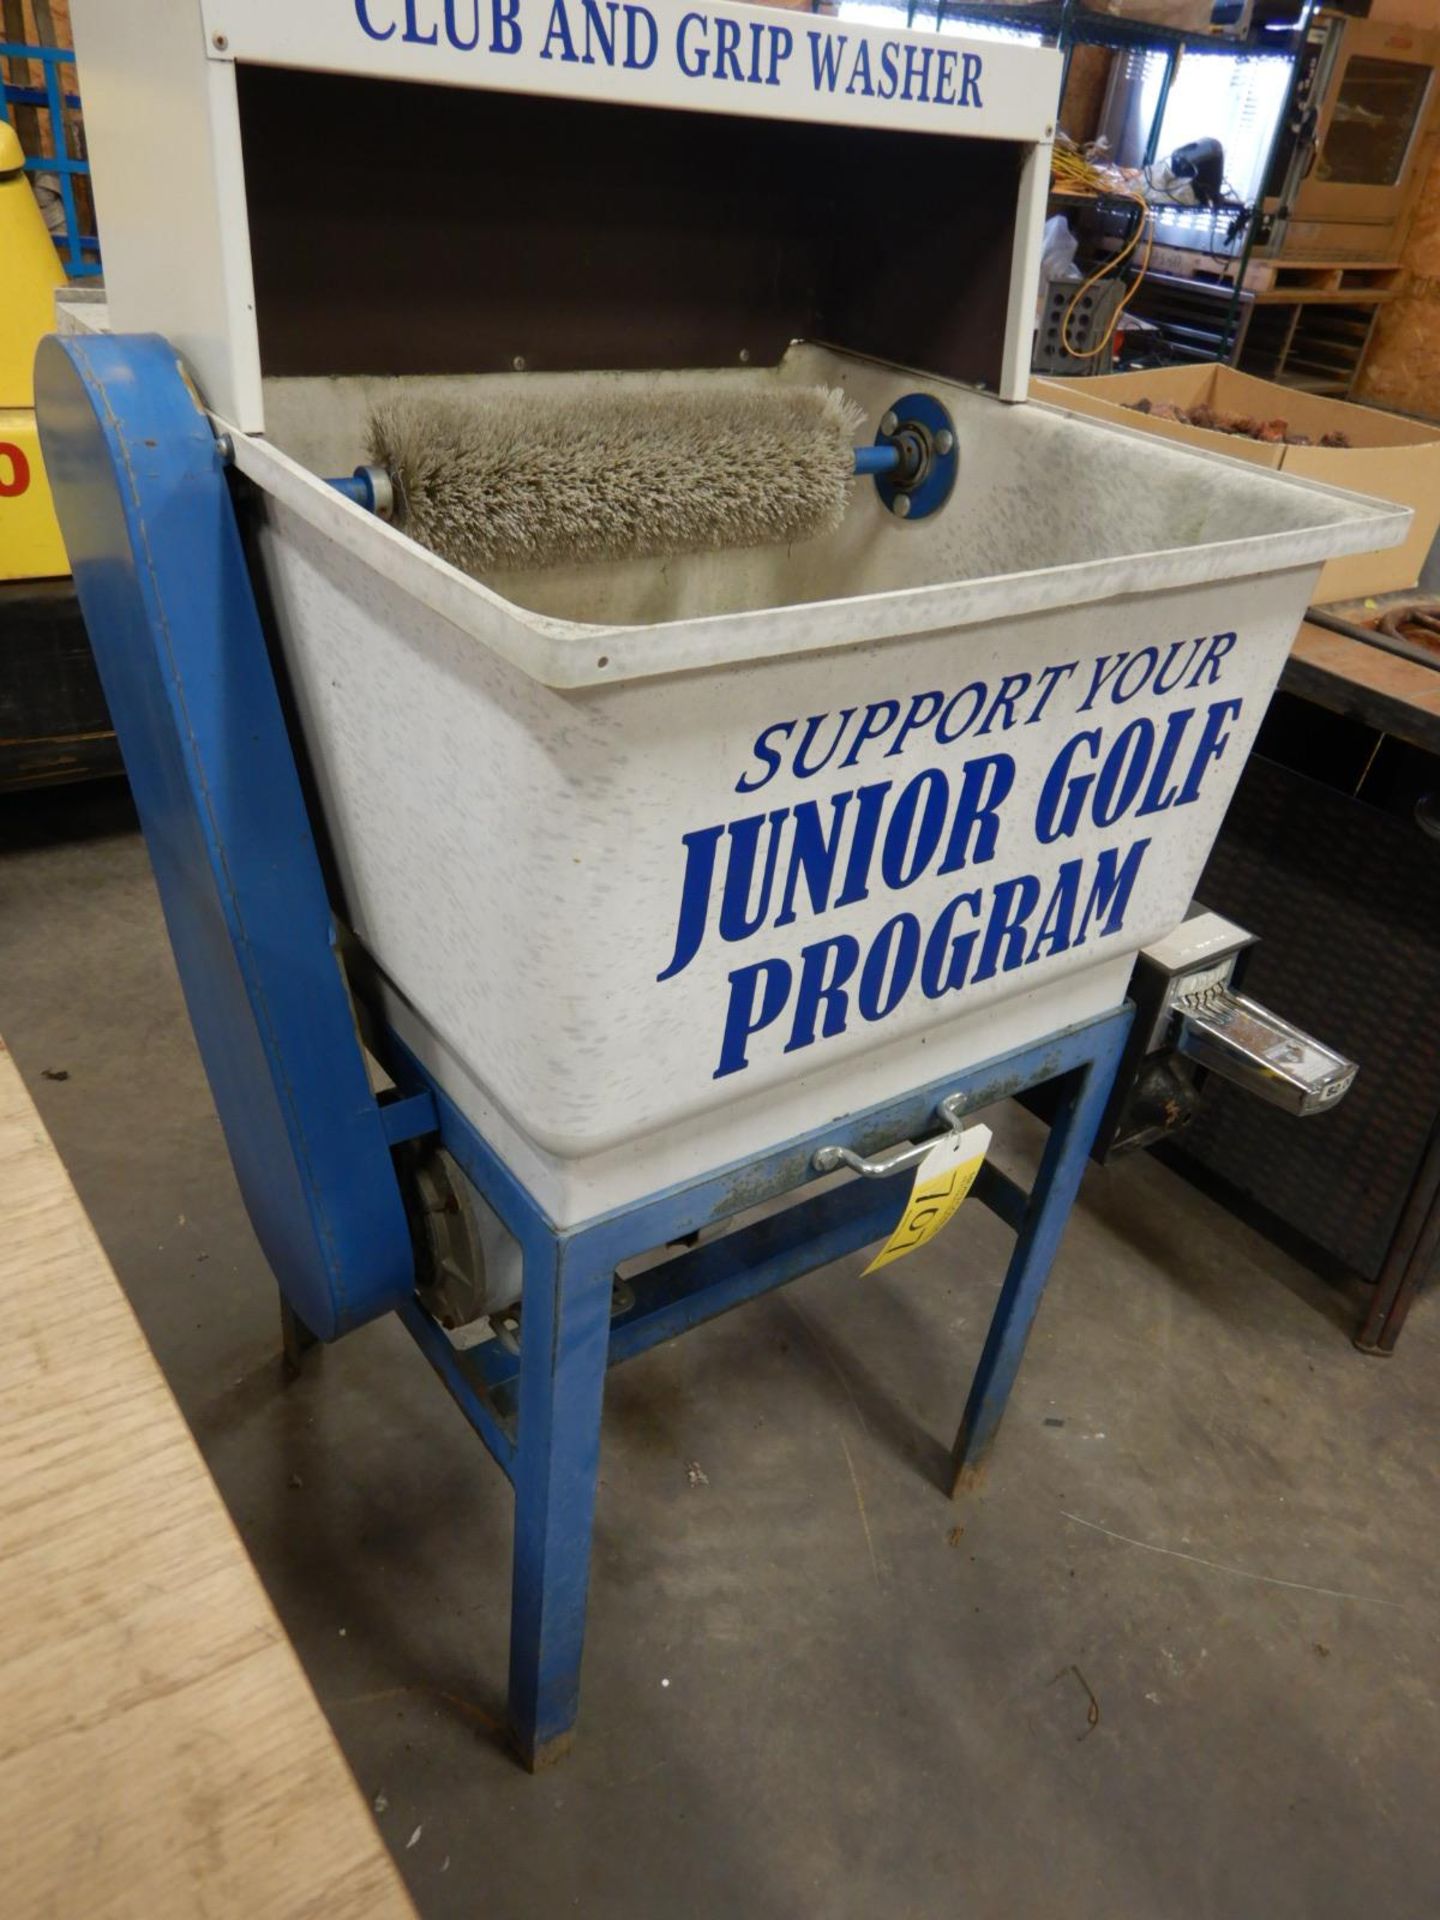 GOLF CLUB & GRIP WASHER, COIN OPERATED - Image 5 of 6